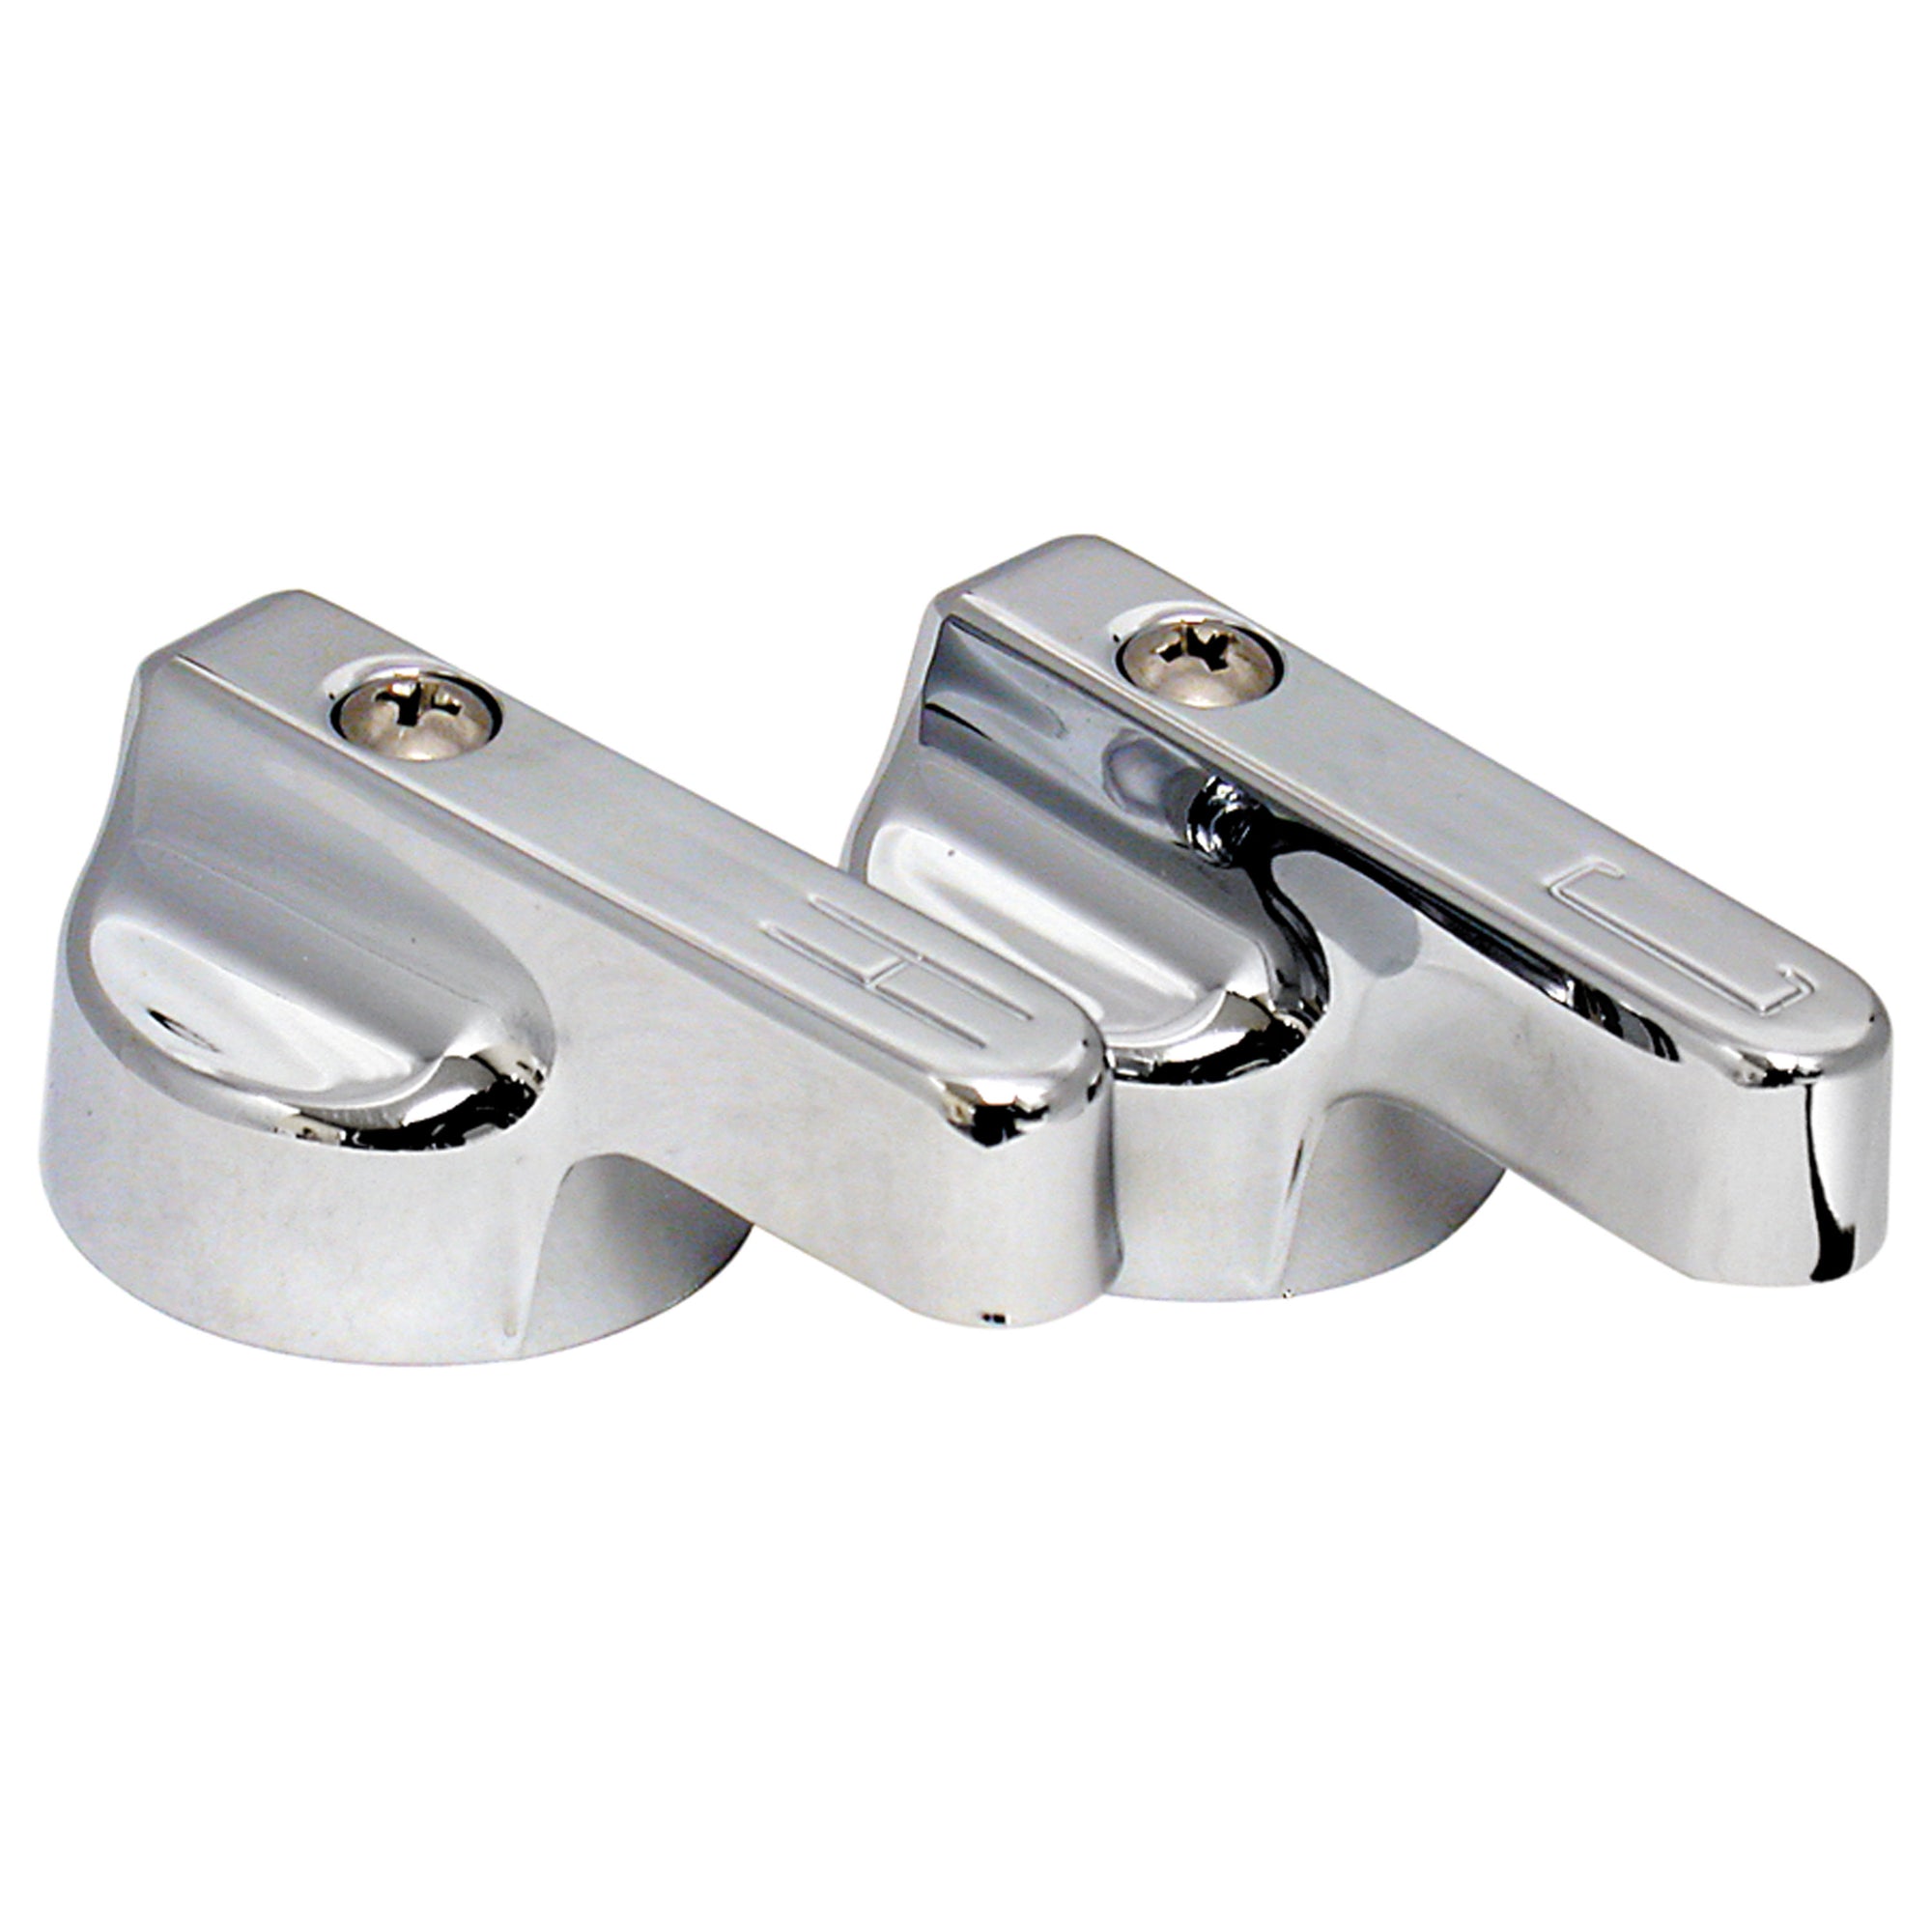 Phoenix Faucets by Valterra PF287006 Replacement Metal Lever Handles - Chrome, Pair